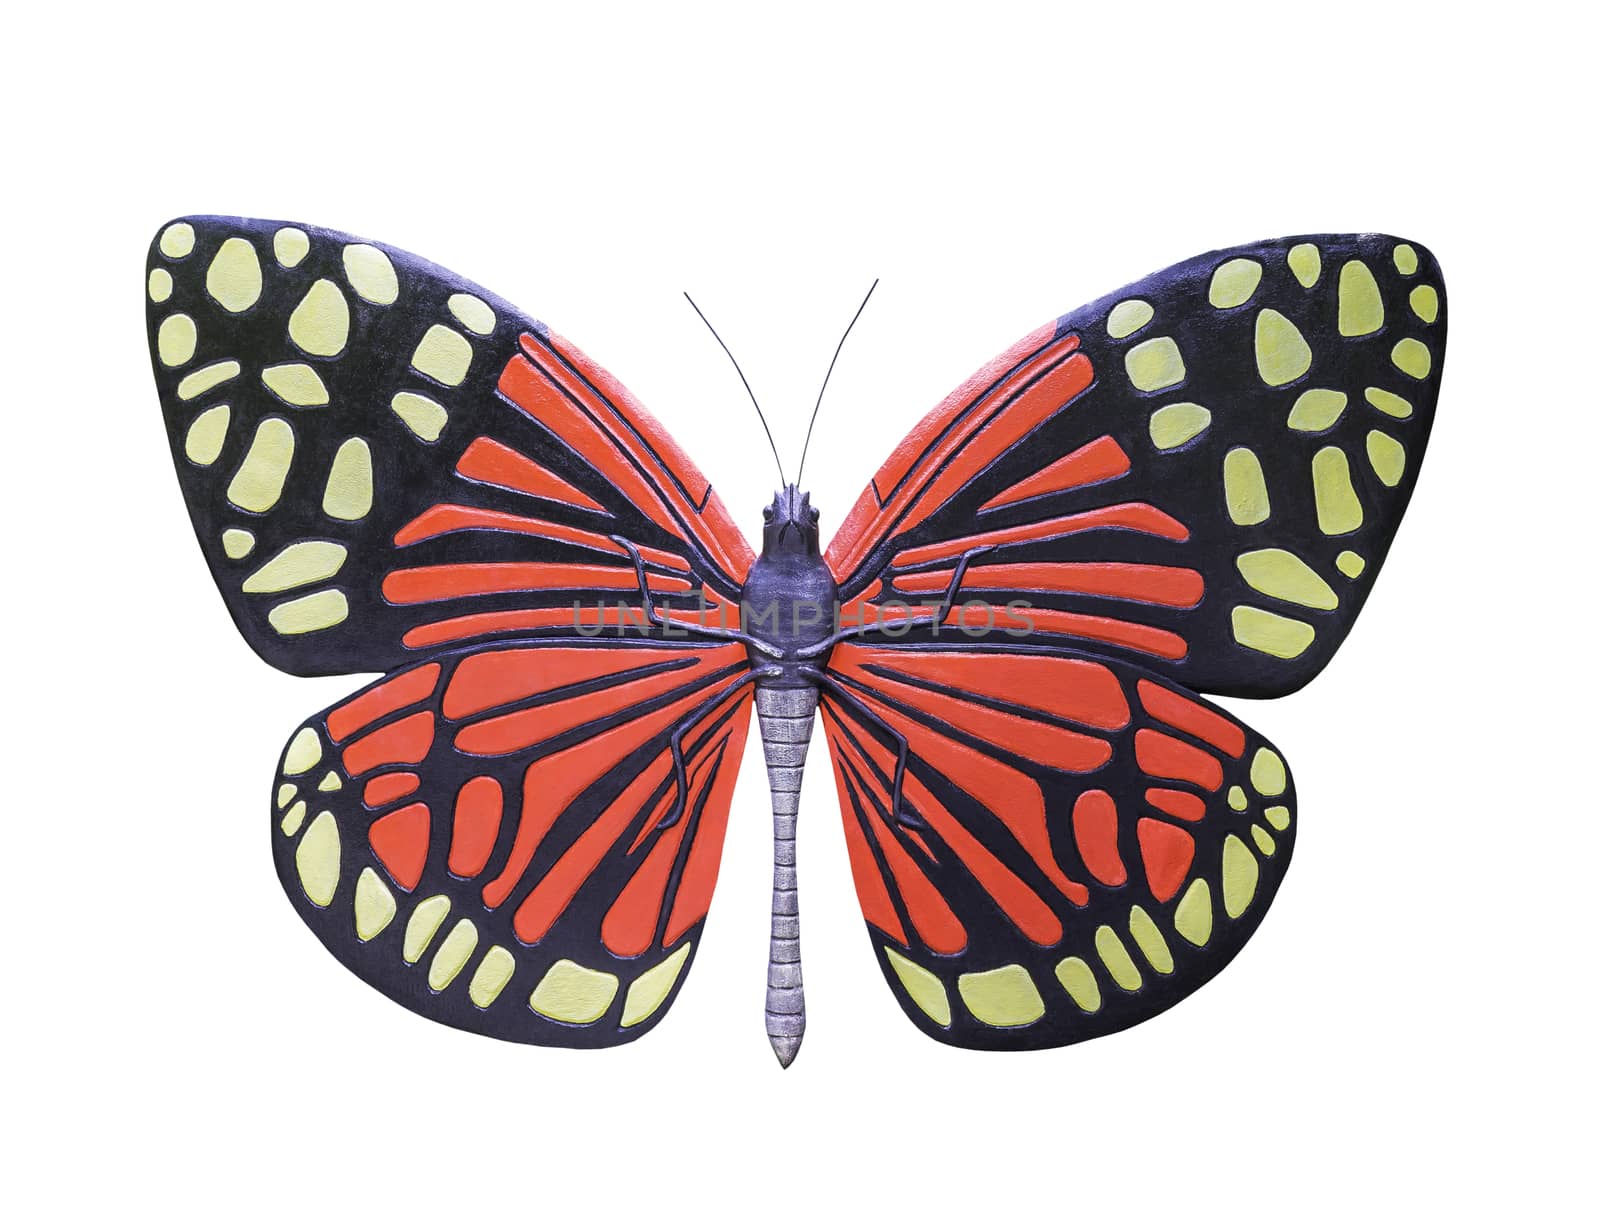 Butterfly statue isolated on white background with clipping path